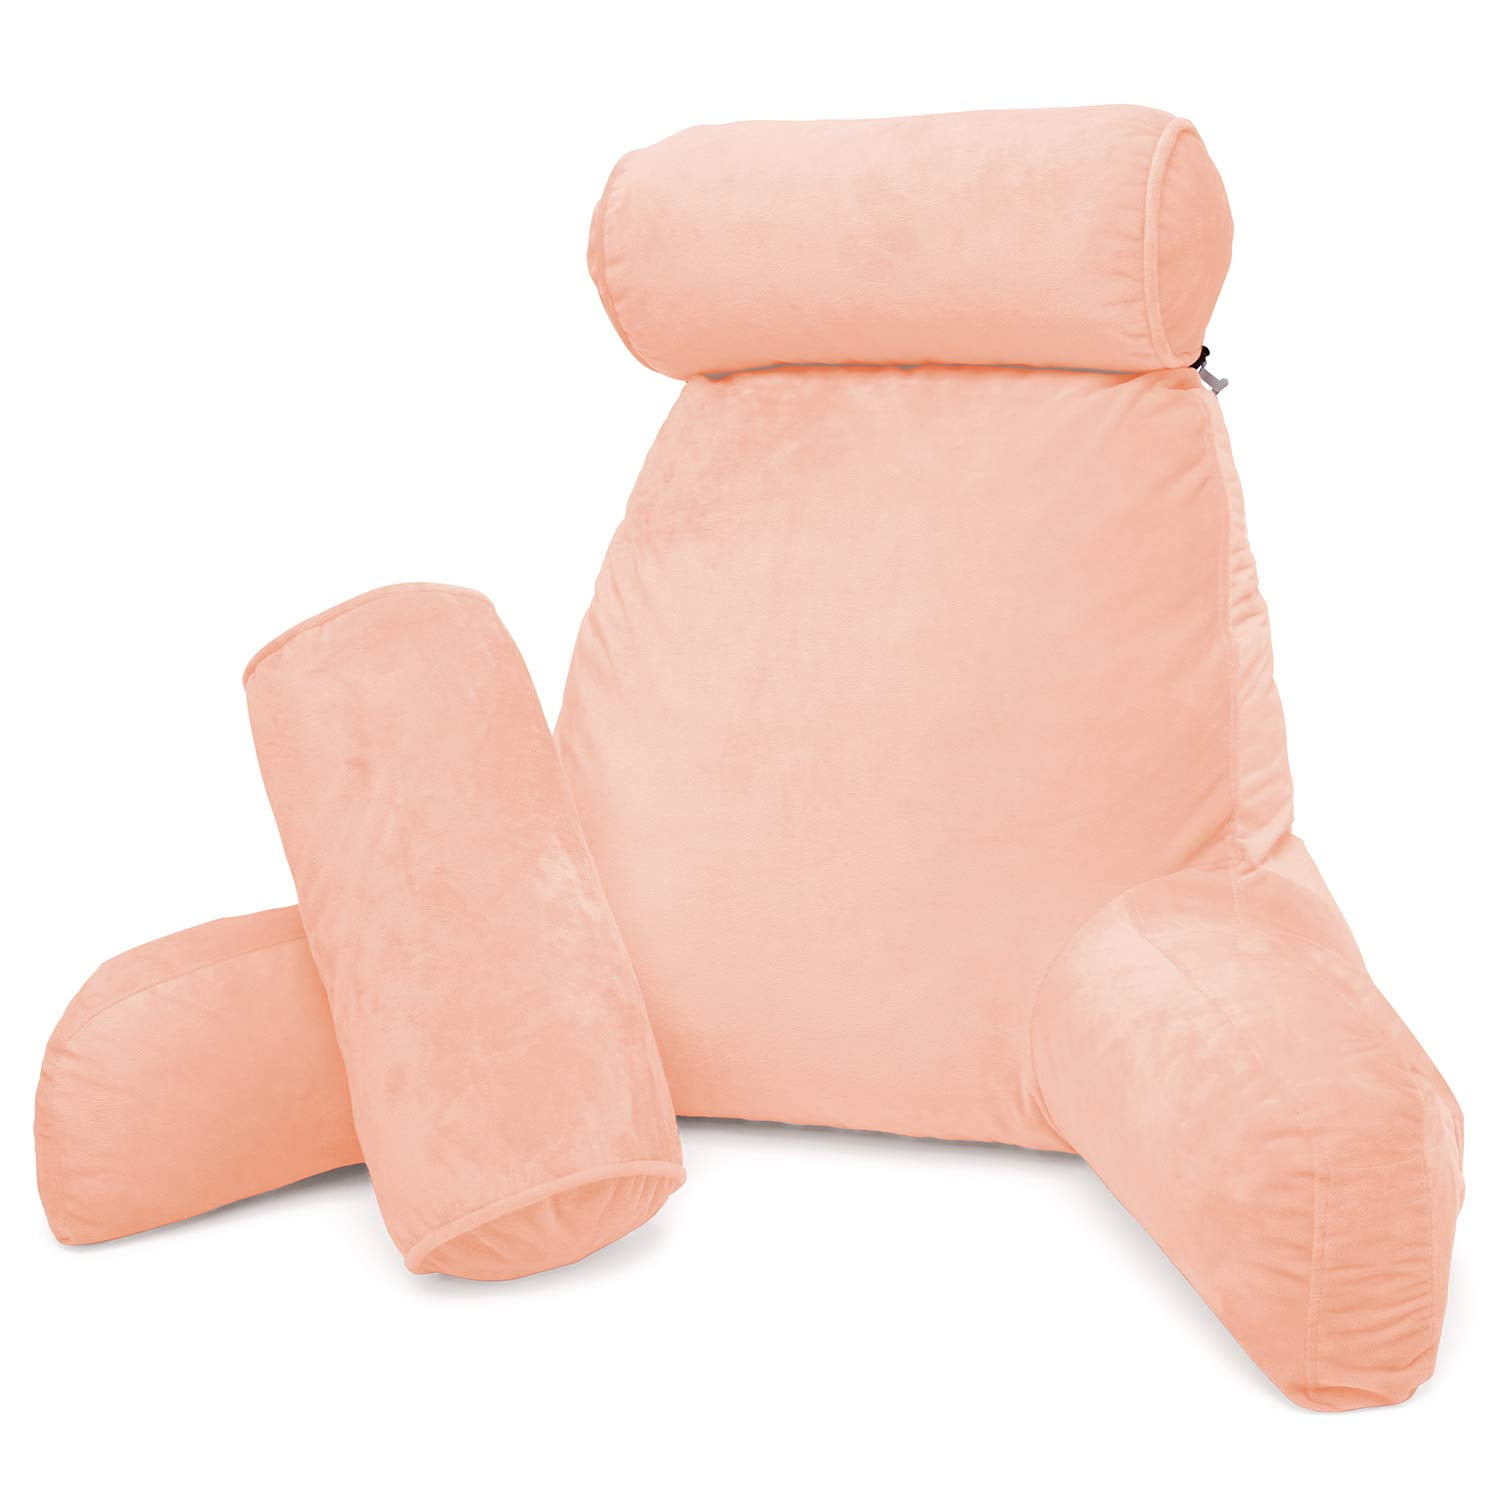 Plush Memory Foam Fill Big Backrest Reading Bed Rest Pillow with Arms 